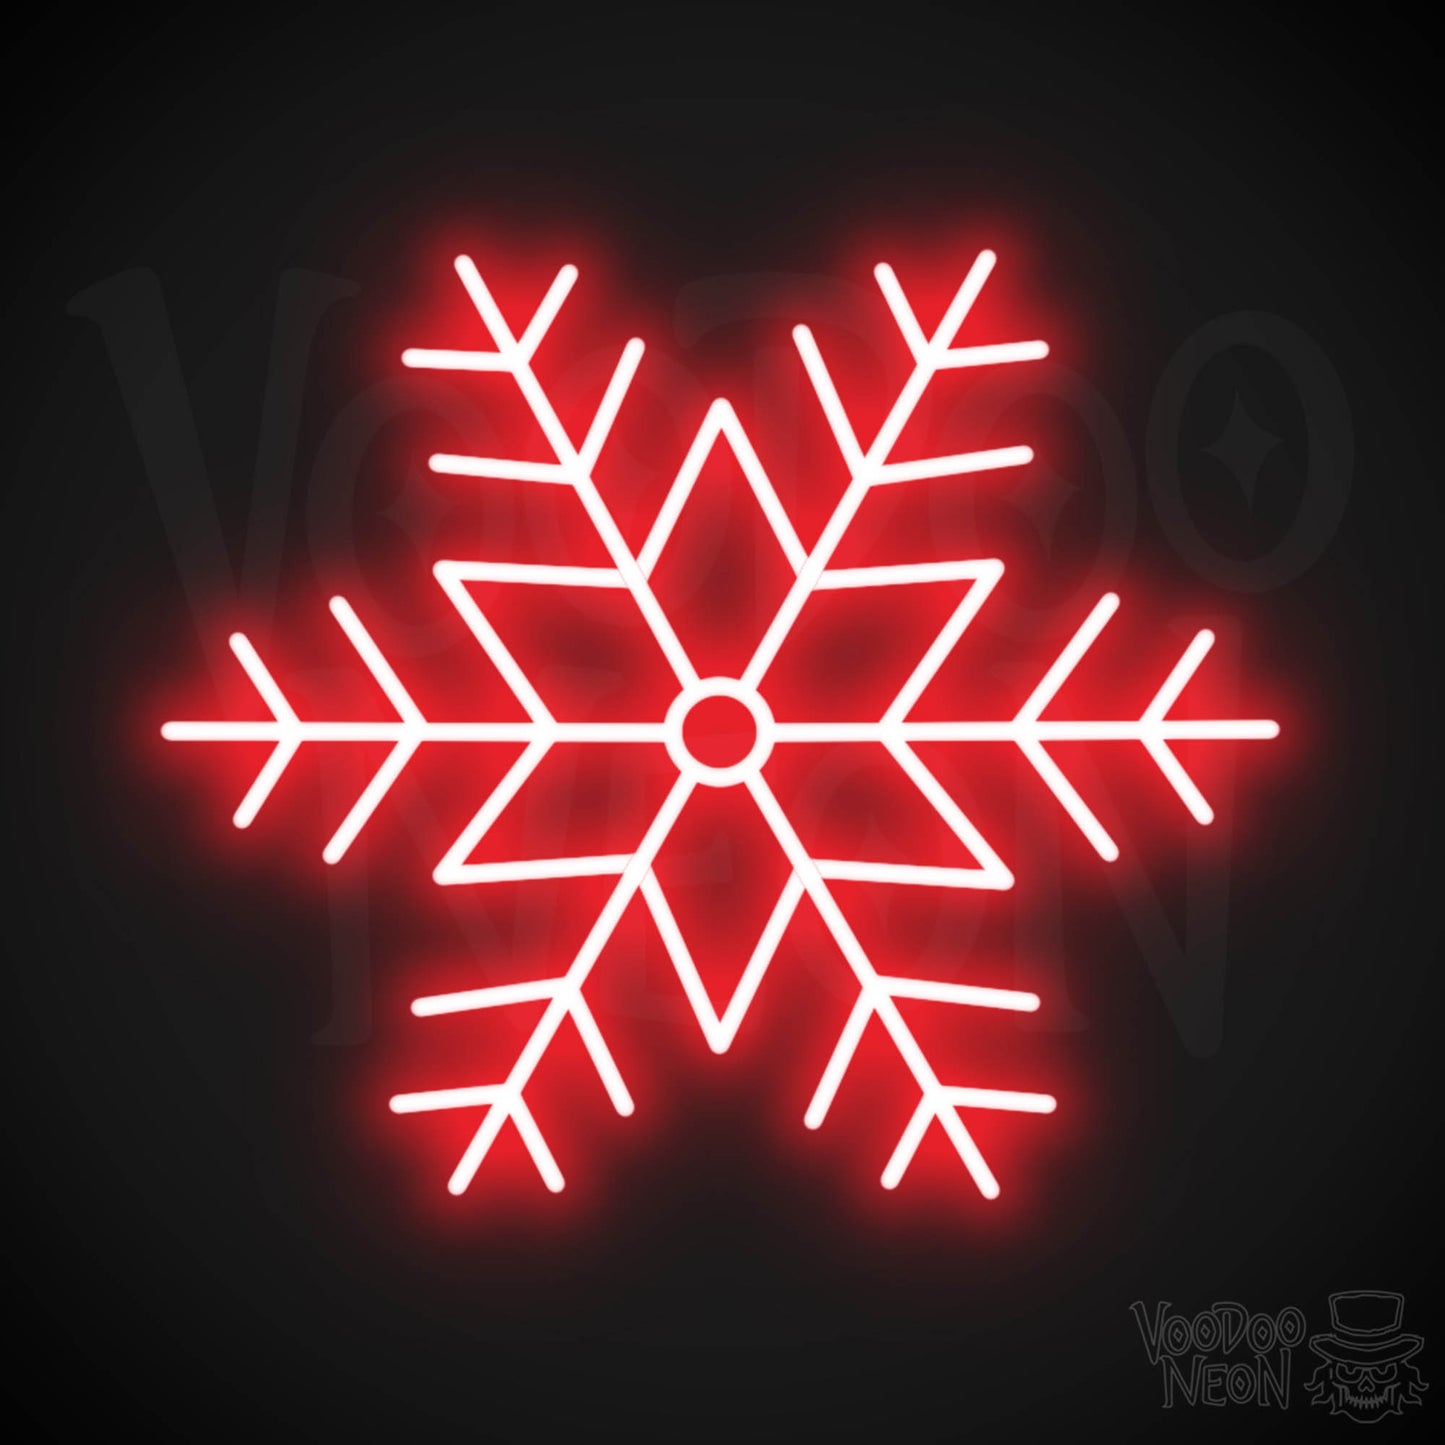 Snow Flakes Neon Sign - Neon Snow Flakes Sign - Xmas LED Wall Art - Color Red